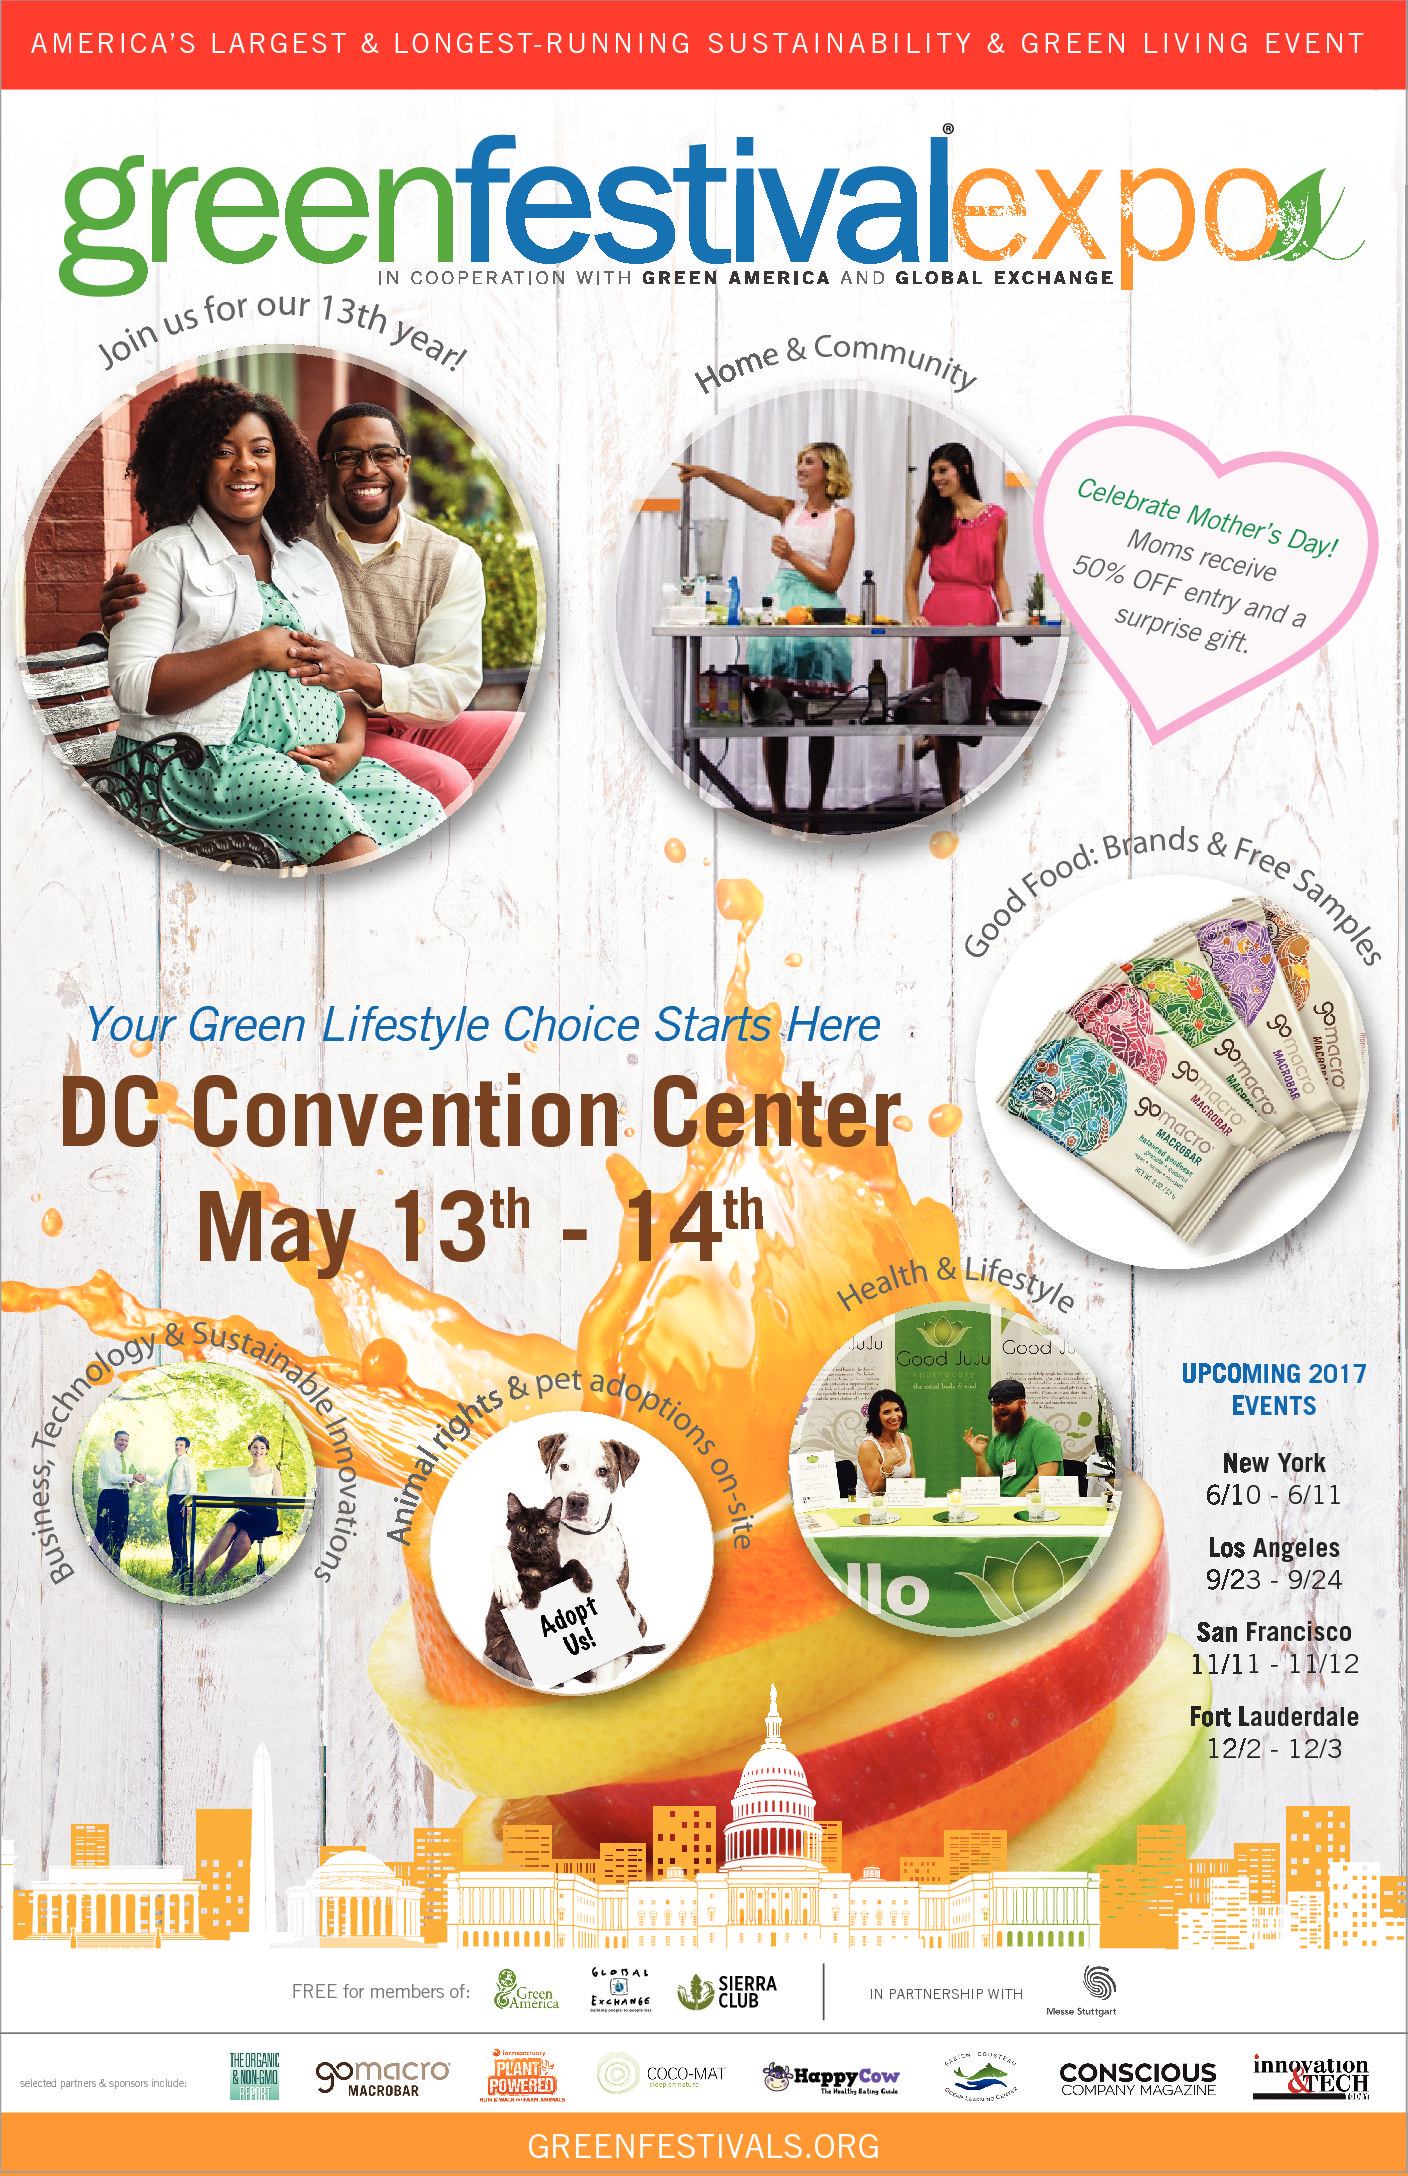 DC Greenfestival